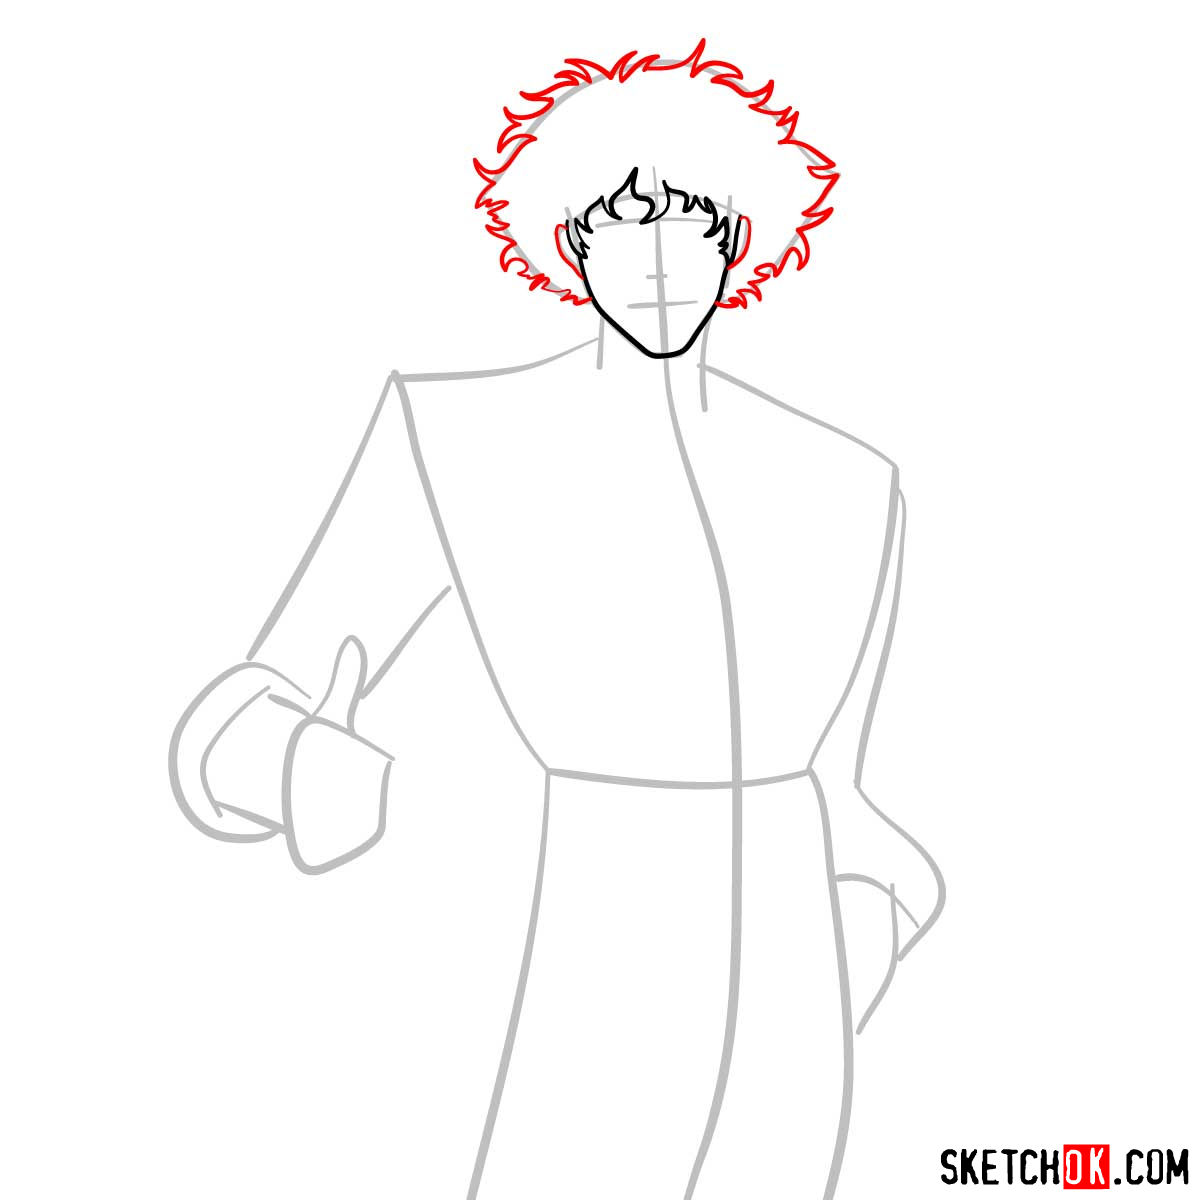 How to draw Spike Spiegel from Cowboy Bebop anime - step 04